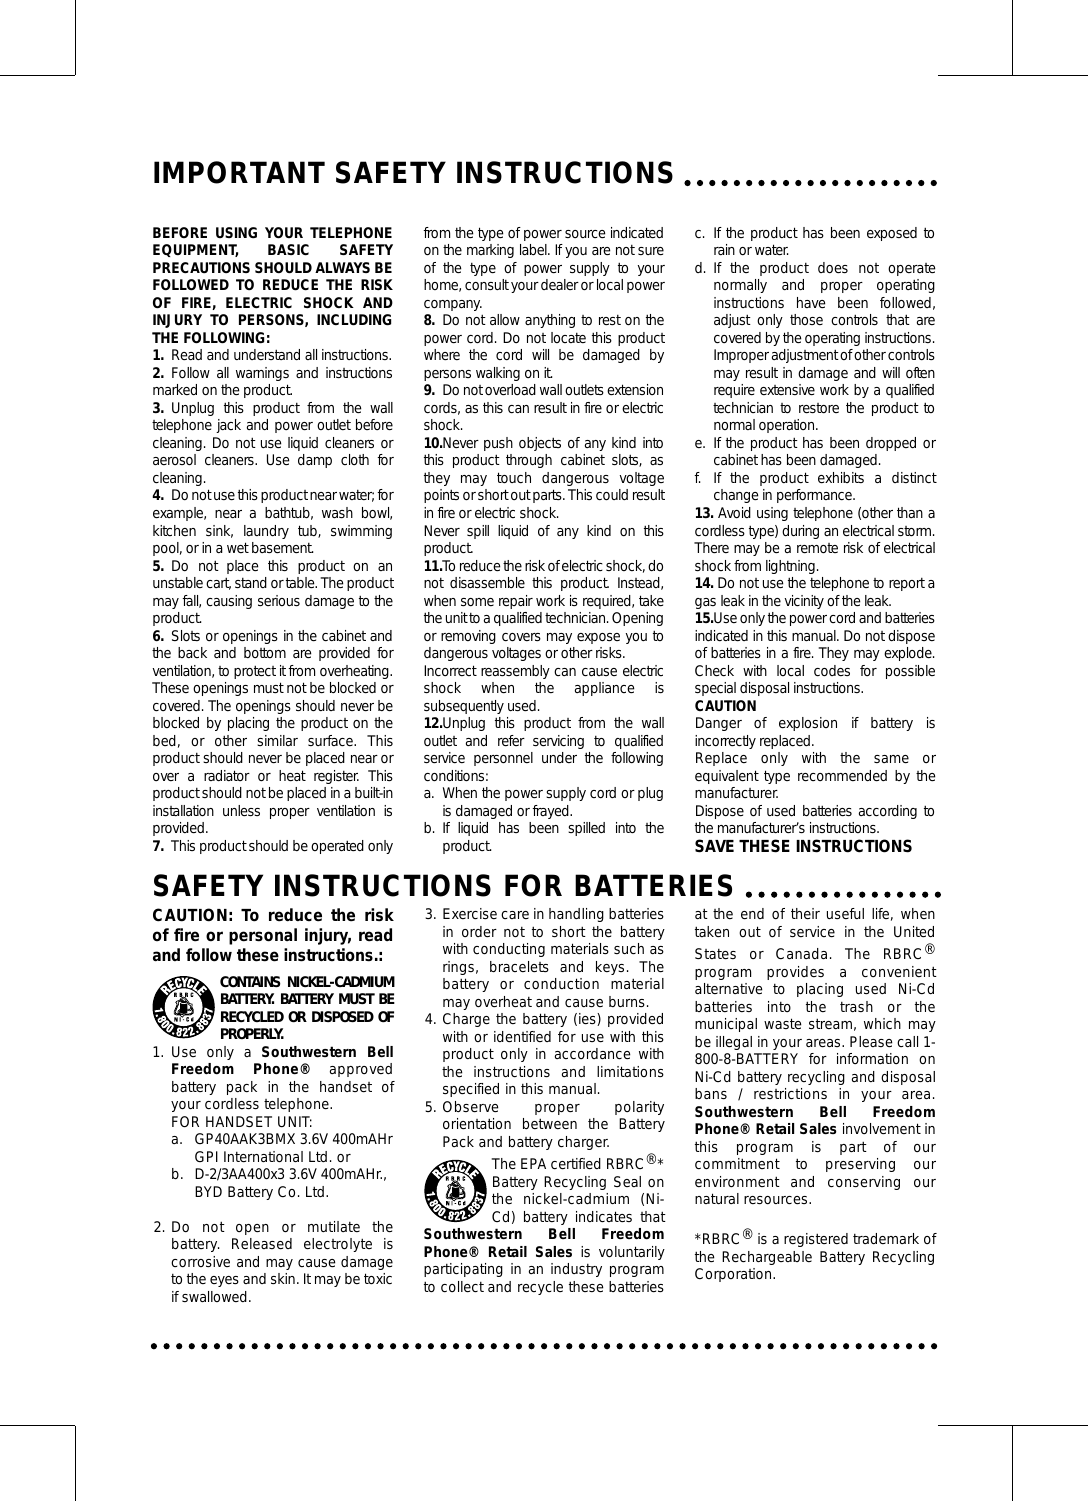 IMPORTANT SAFETY INSTRUCTIONSBEFORE USING YOUR TELEPHONEEQUIPMENT, BASIC SAFETYPRECAUTIONS SHOULD ALWAYS BEFOLLOWED TO REDUCE THE RISKOF FIRE, ELECTRIC SHOCK ANDINJURY TO PERSONS, INCLUDINGTHE FOLLOWING:1. Read and understand all instructions.2. Follow all warnings and instructionsmarked on the product.3. Unplug this product from the walltelephone jack and power outlet beforecleaning. Do not use liquid cleaners oraerosol cleaners. Use damp cloth forcleaning.4. Do not use this product near water; forexample, near a bathtub, wash bowl,kitchen sink, laundry tub, swimmingpool, or in a wet basement.5. Do not place this product on anunstable cart, stand or table. The productmay fall, causing serious damage to theproduct.6. Slots or openings in the cabinet andthe back and bottom are provided forventilation, to protect it from overheating.These openings must not be blocked orcovered. The openings should never beblocked by placing the product on thebed, or other similar surface. Thisproduct should never be placed near orover a radiator or heat register. Thisproduct should not be placed in a built-ininstallation unless proper ventilation isprovided.7. This product should be operated onlyfrom the type of power source indicatedon the marking label. If you are not sureof the type of power supply to yourhome, consult your dealer or local powercompany.8. Do not allow anything to rest on thepower cord. Do not locate this productwhere the cord will be damaged bypersons walking on it.9. Do not overload wall outlets extensioncords, as this can result in fire or electricshock.10.Never push objects of any kind intothis product through cabinet slots, asthey may touch dangerous voltagepoints or short out parts. This could resultin fire or electric shock.Never spill liquid of any kind on thisproduct.11.To reduce the risk of electric shock, donot disassemble this product. Instead,when some repair work is required, takethe unit to a qualified technician. Openingor removing covers may expose you todangerous voltages or other risks.Incorrect reassembly can cause electricshock when the appliance issubsequently used.12.Unplug this product from the walloutlet and refer servicing to qualifiedservice personnel under the followingconditions:a. When the power supply cord or plugis damaged or frayed.b. If liquid has been spilled into theproduct.c. If the product has been exposed torain or water.d. If the product does not operatenormally and proper operatinginstructions have been followed,adjust only those controls that arecovered by the operating instructions.Improper adjustment of other controlsmay result in damage and will oftenrequire extensive work by a qualifiedtechnician to restore the product tonormal operation.e. If the product has been dropped orcabinet has been damaged.f. If the product exhibits a distinctchange in performance.13. Avoid using telephone (other than acordless type) during an electrical storm.There may be a remote risk of electricalshock from lightning.14. Do not use the telephone to report agas leak in the vicinity of the leak.15.Use only the power cord and batteriesindicated in this manual. Do not disposeof batteries in a fire. They may explode.Check with local codes for possiblespecial disposal instructions.CAUTIONDanger of explosion if battery isincorrectly replaced.Replace only with the same orequivalent type recommended by themanufacturer.Dispose of used batteries according tothe manufacturer’s instructions.SAVE THESE INSTRUCTIONSSAFETY INSTRUCTIONS FOR BATTERIESCAUTION: To reduce the riskof fire or personal injury, readand follow these instructions.:CONTAINS NICKEL-CADMIUMBATTERY. BATTERY MUST BERECYCLED OR DISPOSED OFPROPERLY.1. Use only a Southwestern BellFreedom Phone® approvedbattery pack in the handset ofyour cordless telephone.FOR HANDSET UNIT:a. GP40AAK3BMX 3.6V 400mAHrGPI International Ltd. orb. D-2/3AA400x3 3.6V 400mAHr.,BYD Battery Co. Ltd.2. Do not open or mutilate thebattery. Released electrolyte iscorrosive and may cause damageto the eyes and skin. It may be toxicif swallowed.3. Exercise care in handling batteriesin order not to short the batterywith conducting materials such asrings, bracelets and keys. Thebattery or conduction materialmay overheat and cause burns.4. Charge the battery (ies) providedwith or identified for use with thisproduct only in accordance withthe instructions and limitationsspecified in this manual.5. Observe proper polarityorientation between the BatteryPack and battery charger.The EPA certified RBRC®*Battery Recycling Seal onthe nickel-cadmium (Ni-Cd) battery indicates thatSouthwestern Bell FreedomPhone® Retail Sales is voluntarilyparticipating in an industry programto collect and recycle these batteriesat the end of their useful life, whentaken out of service in the UnitedStates or Canada. The RBRC®program provides a convenientalternative to placing used Ni-Cdbatteries into the trash or themunicipal waste stream, which maybe illegal in your areas. Please call 1-800-8-BATTERY for information onNi-Cd battery recycling and disposalbans / restrictions in your area.Southwestern Bell FreedomPhone® Retail Sales involvement inthis program is part of ourcommitment to preserving ourenvironment and conserving ournatural resources.*RBRC®is a registered trademark ofthe Rechargeable Battery RecyclingCorporation.